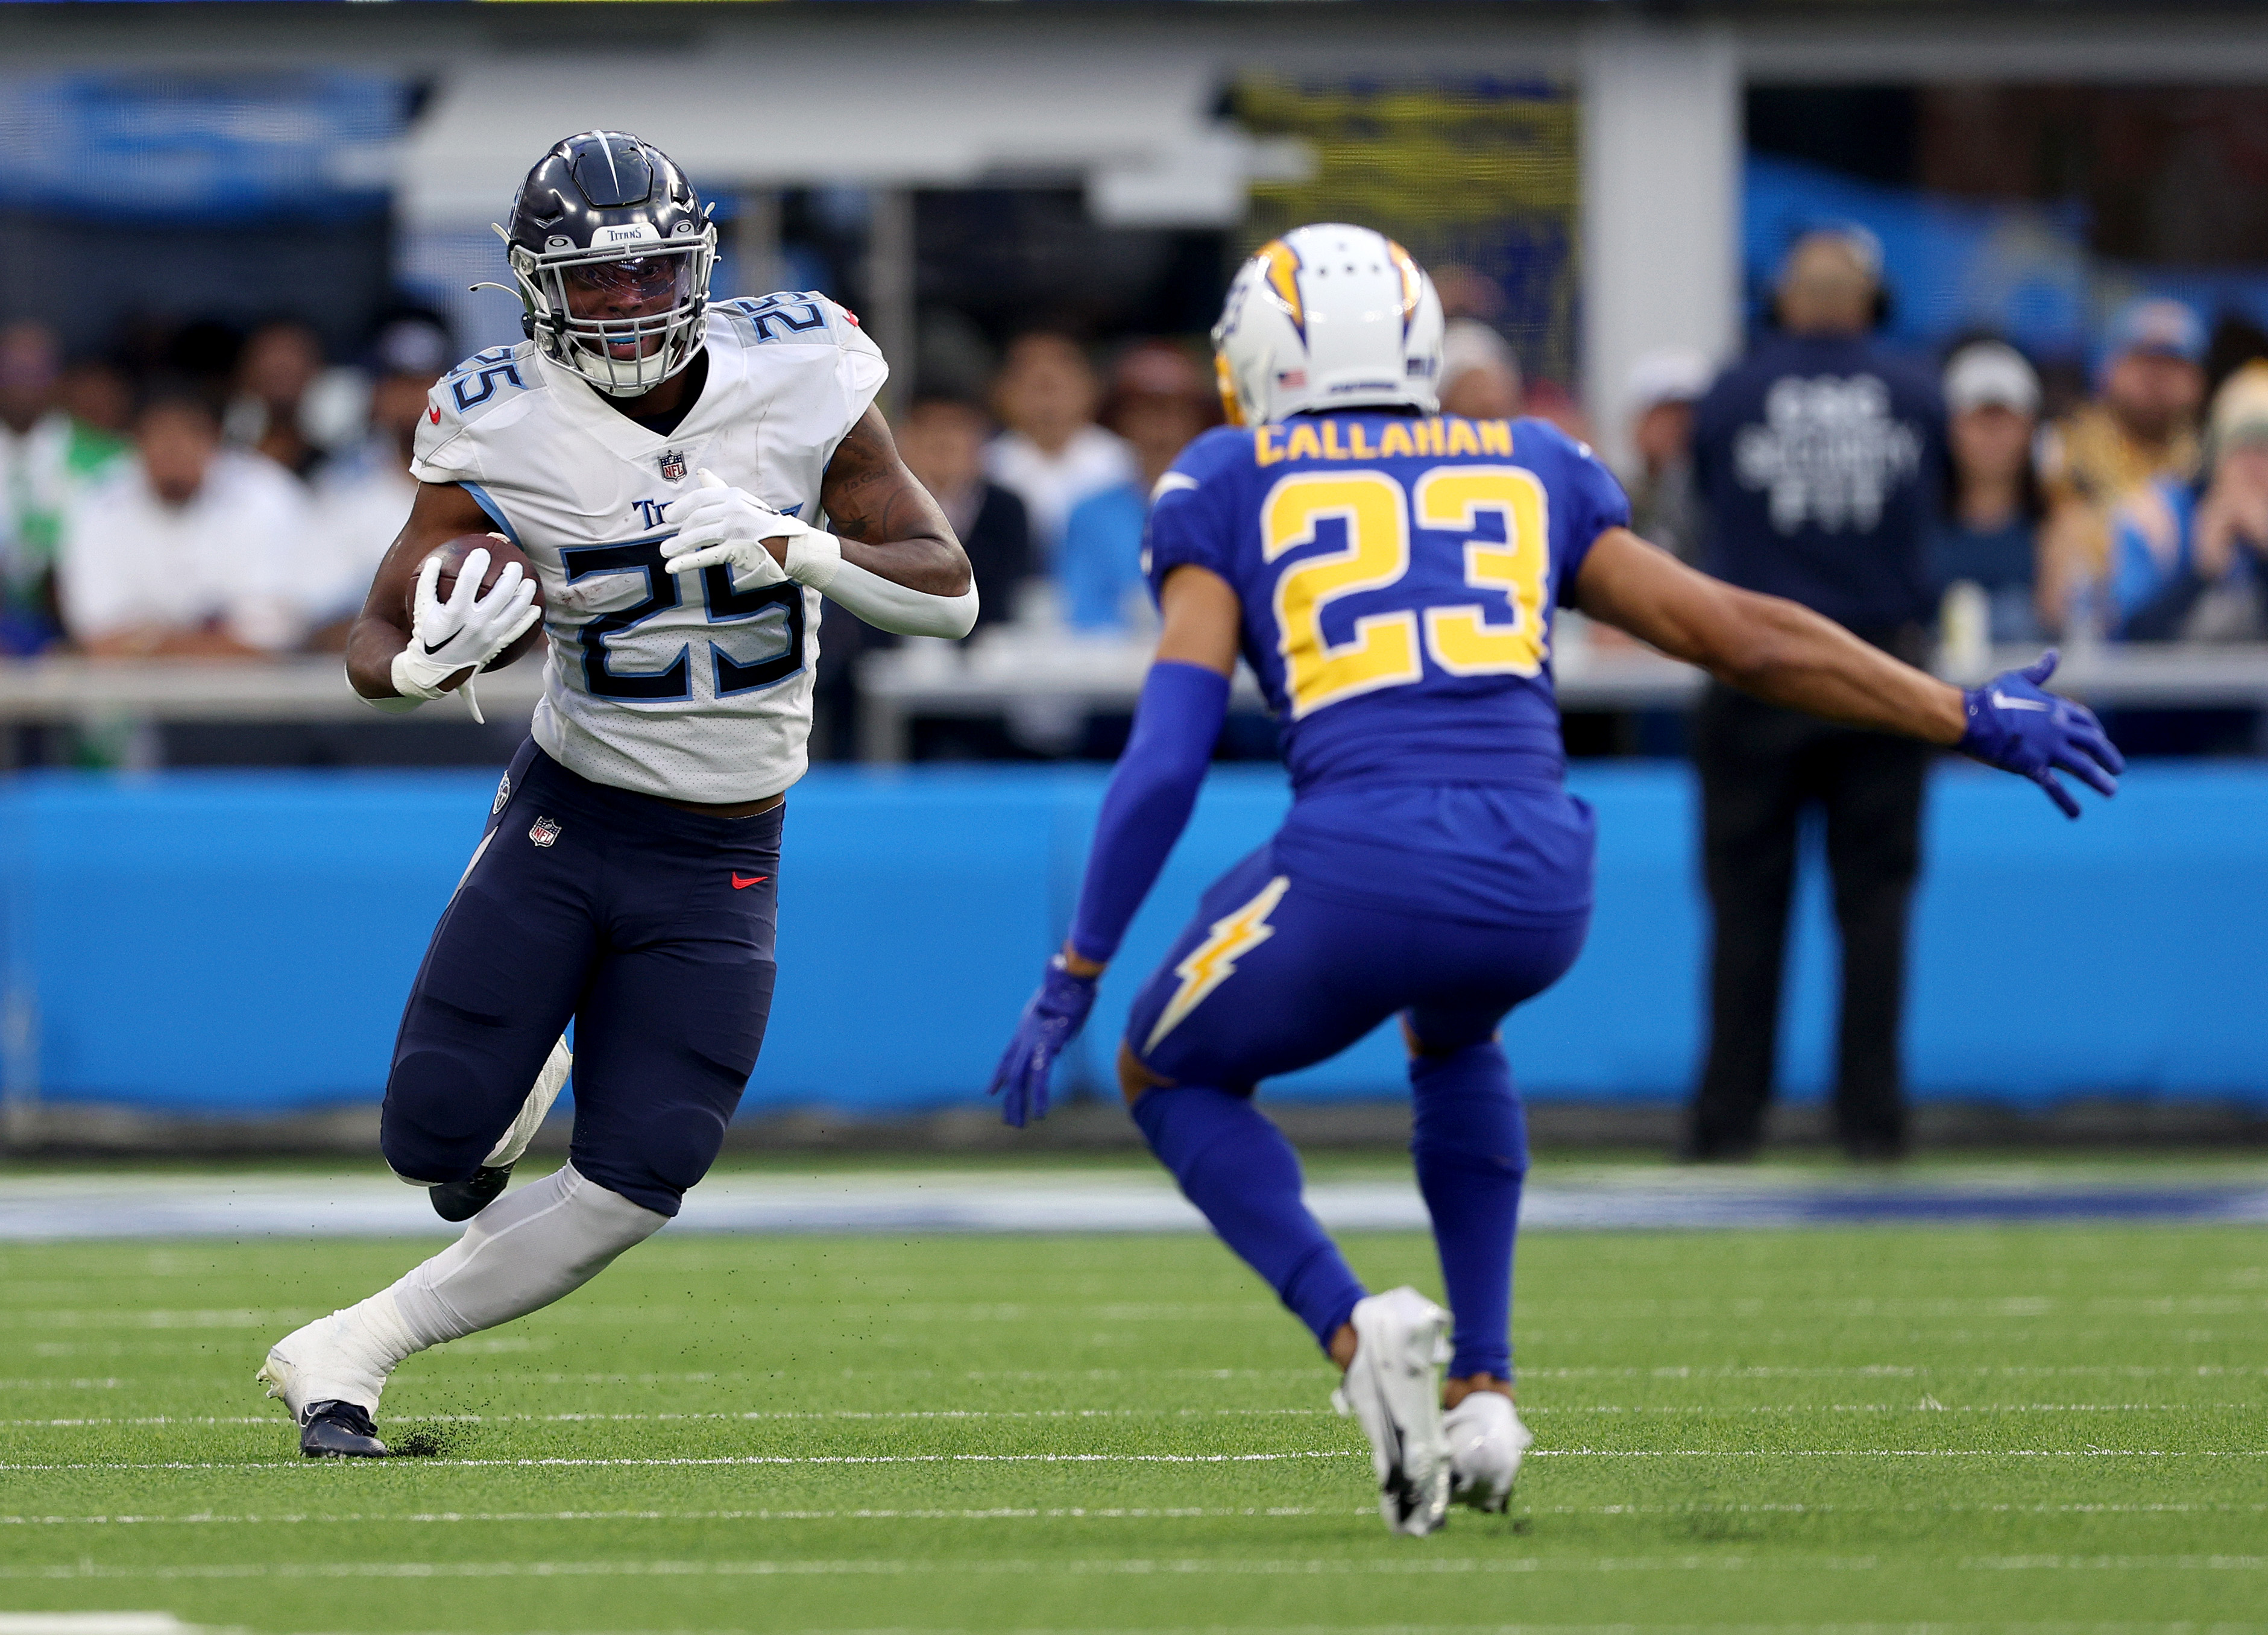 Hassan Haskins #25 of the Tennessee Titans runs with the ball in front of Bryce Callahan #23 of the Los Angeles ChargBryce Callahan #23 of the Los Angeles Chargersduring a 17-14 loss to the Chargers at SoFi Stadium on December 18, 2022 in Inglewood, California.